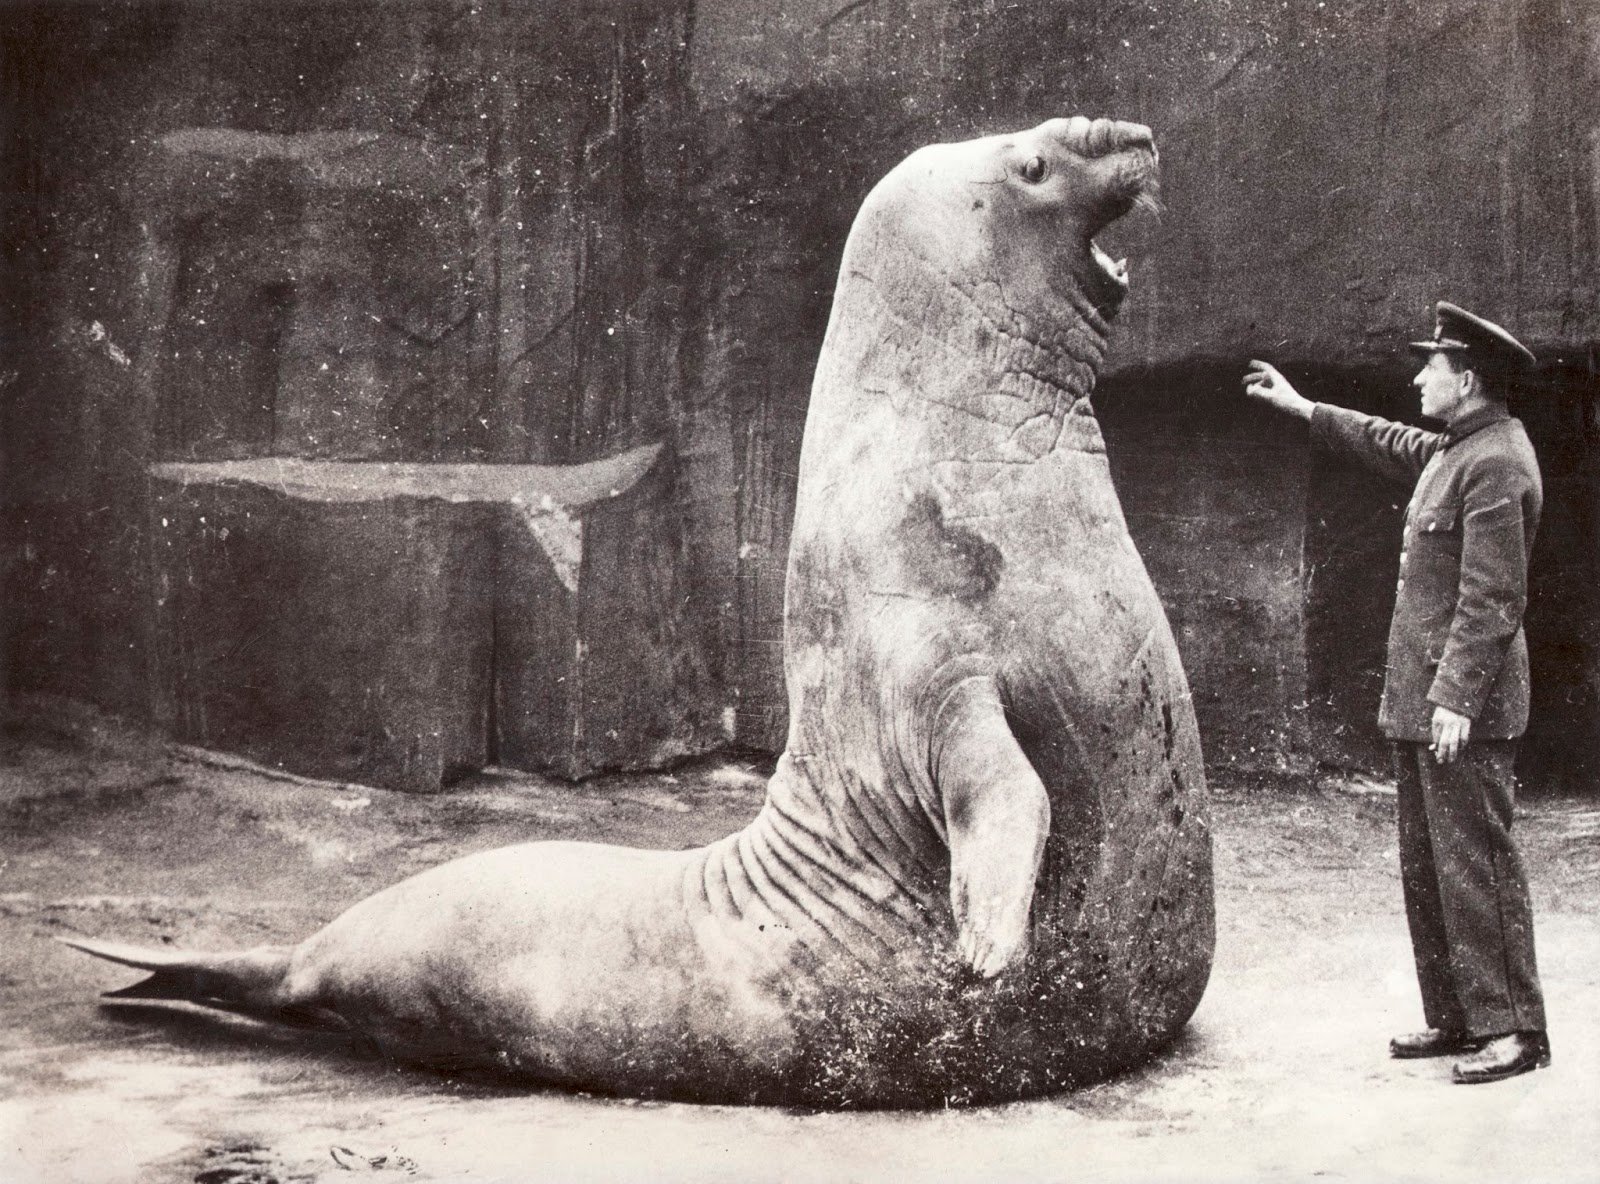 goliath_the_elephant_seal_at_vincennes_zoo_paris_with_his_keeper_vintage_photo_1936.jpg